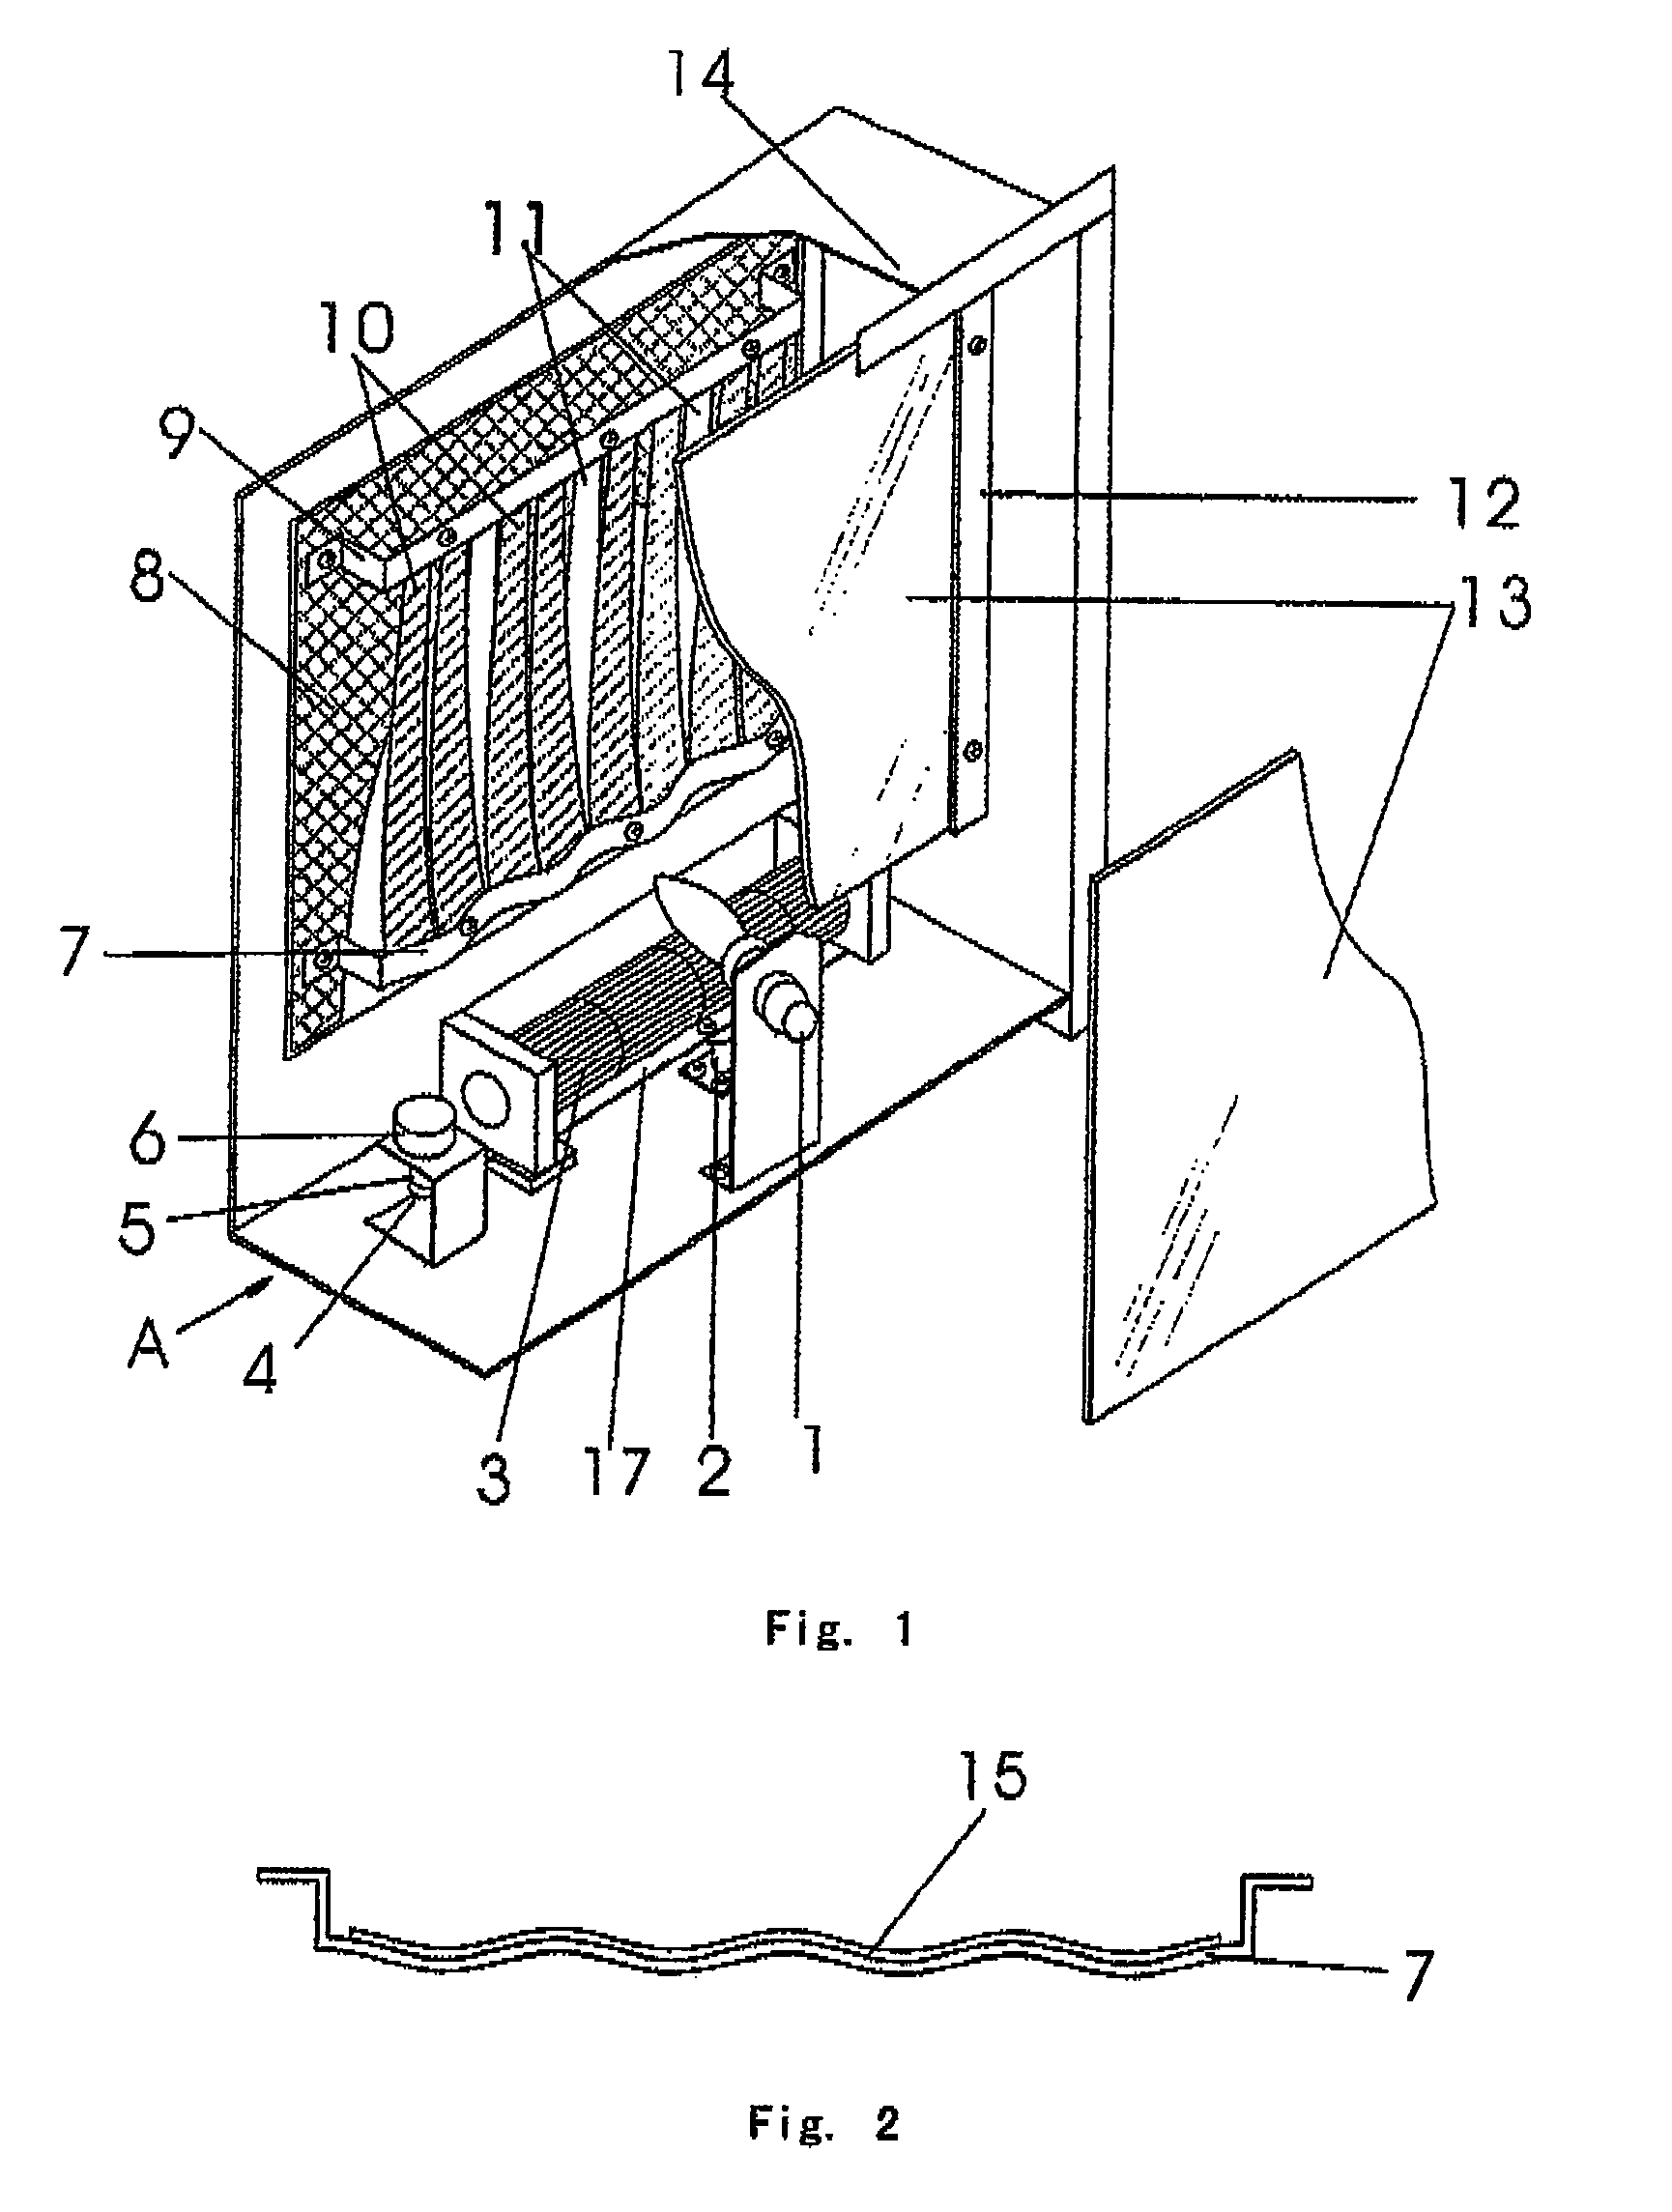 Flame imitation manufacturing device of an electrical-heated fireplace